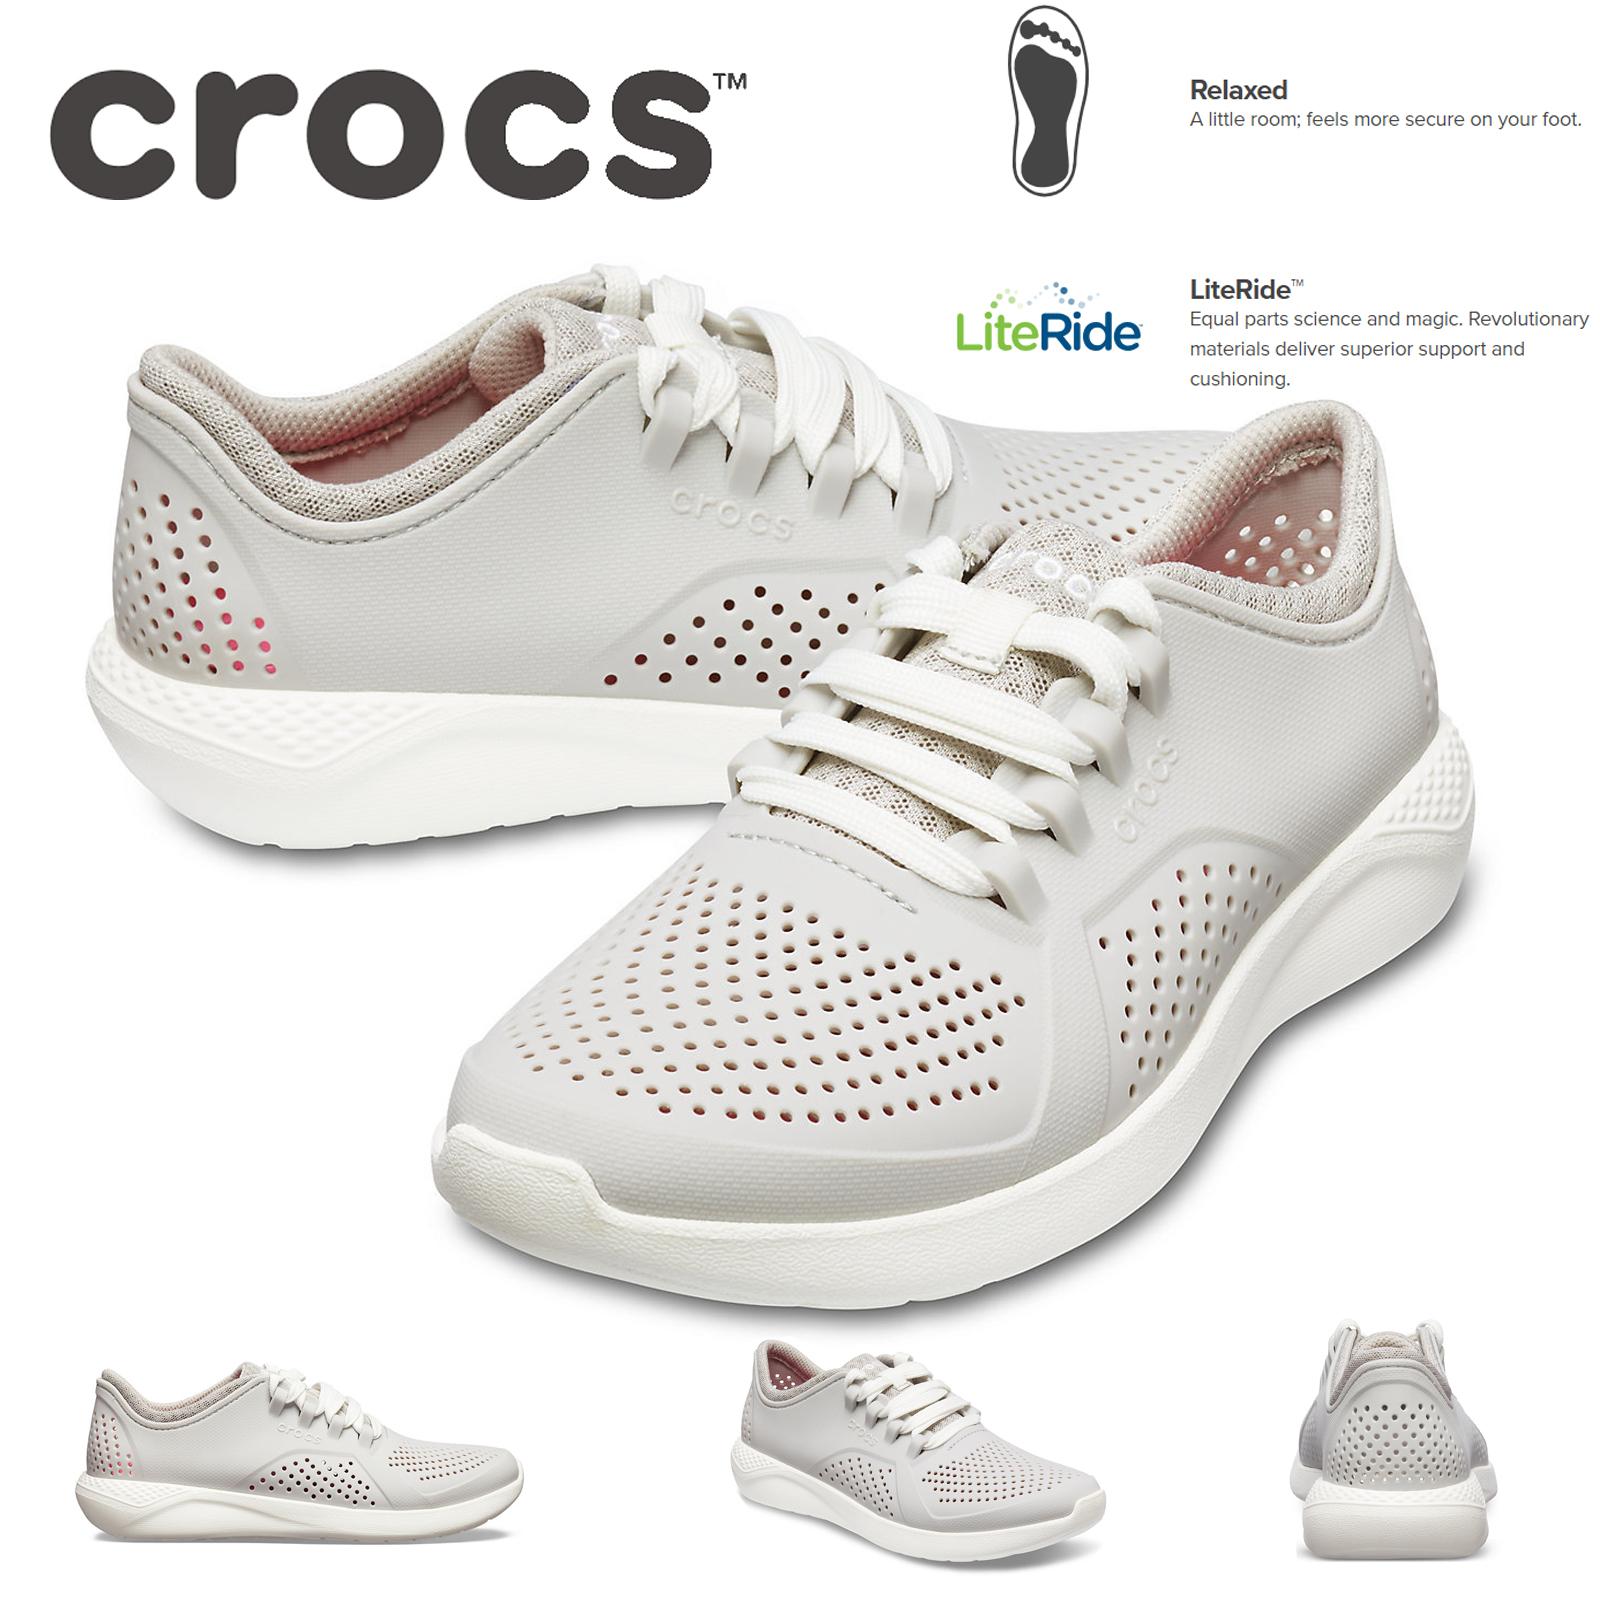 LiteRide Pacer Shoes Sneakers - Pearl White